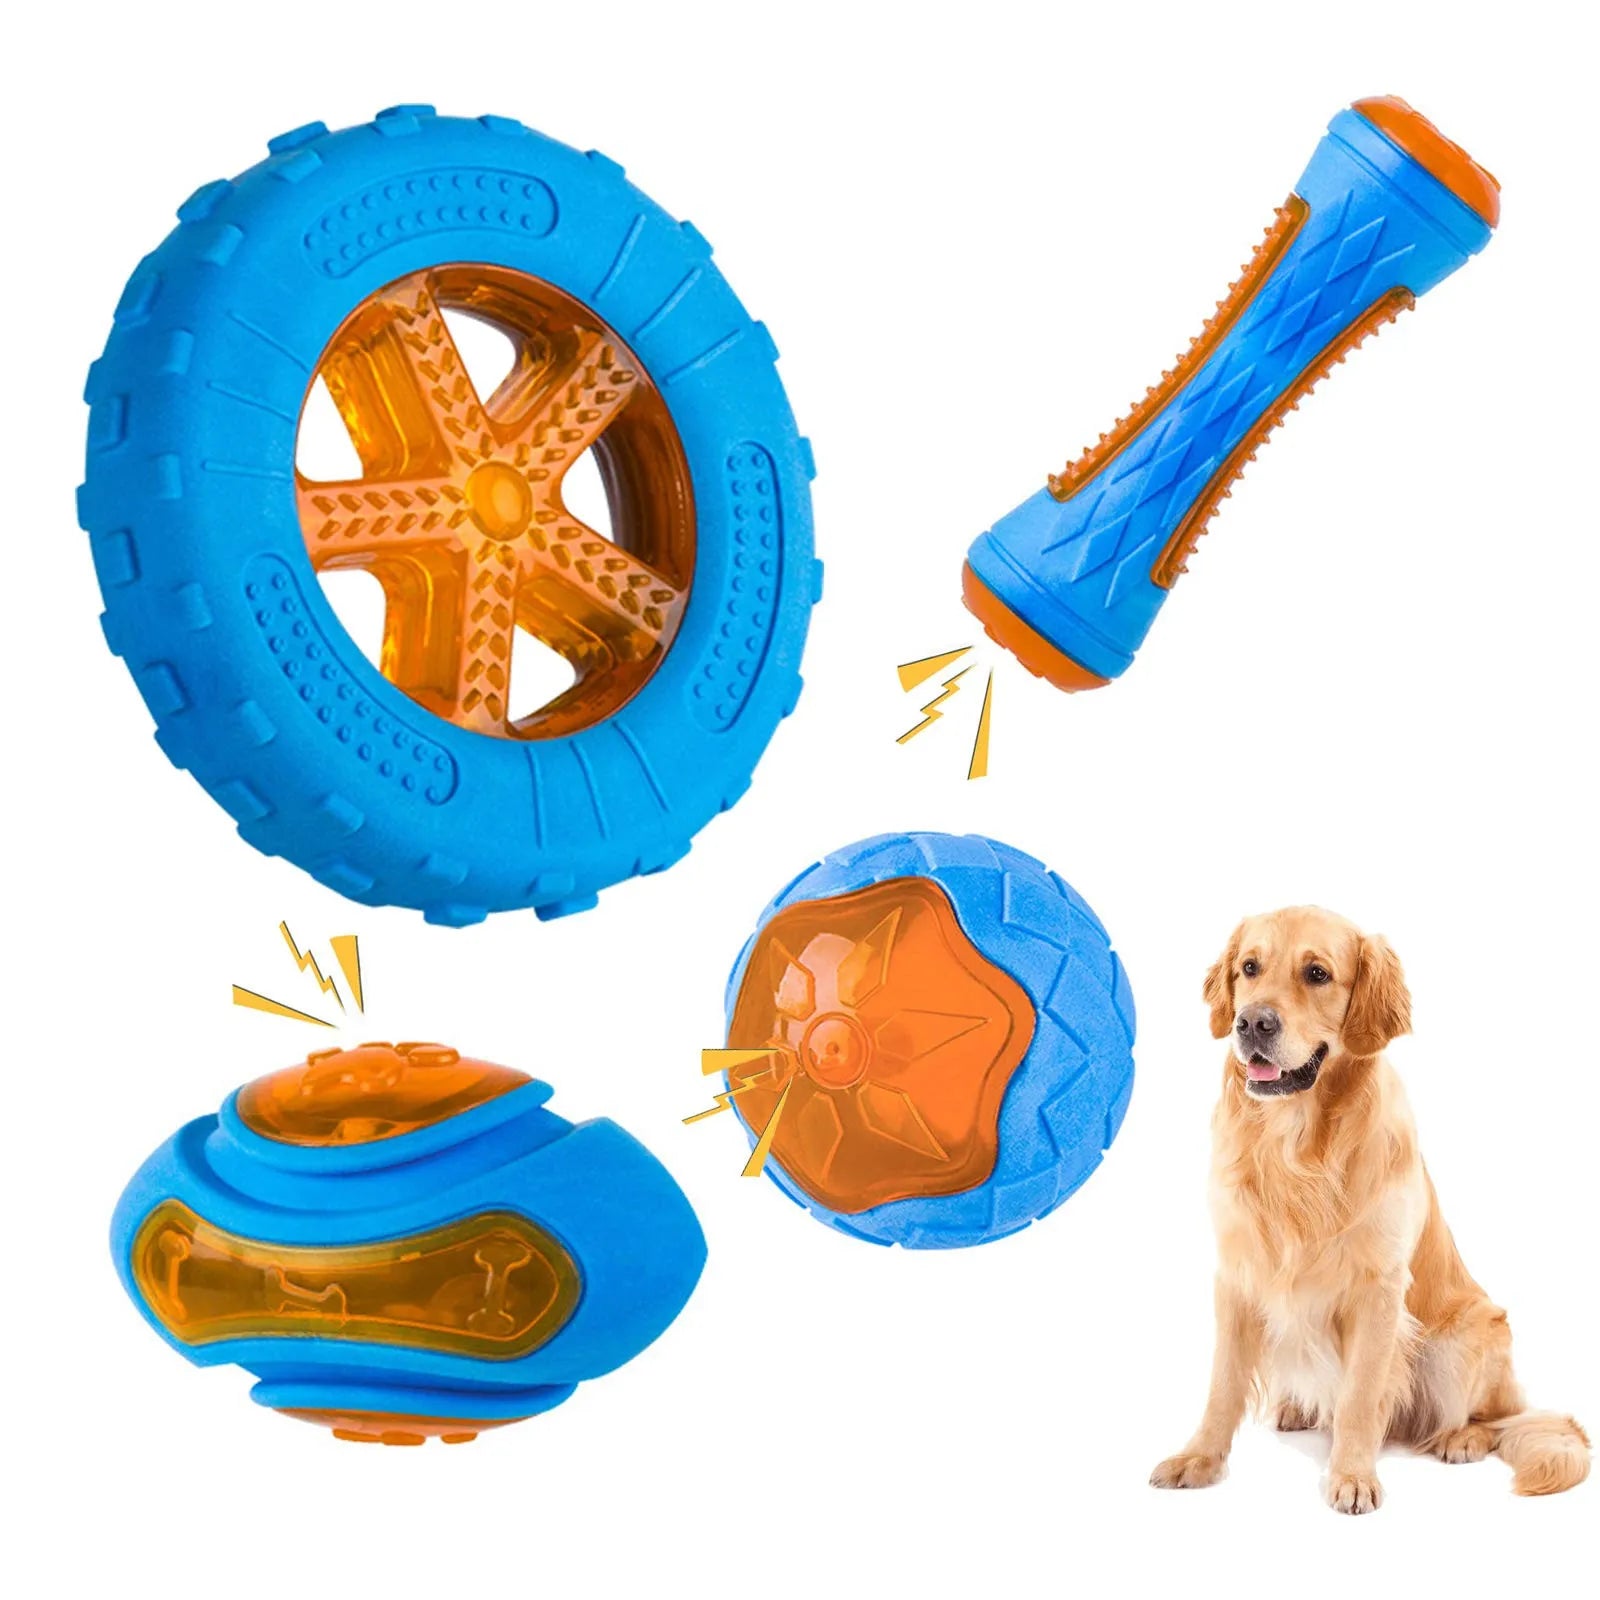 Rubber Dog Chewing Toys: Ultimate Solution for Large Dogs' Dental Health  ourlum.com   